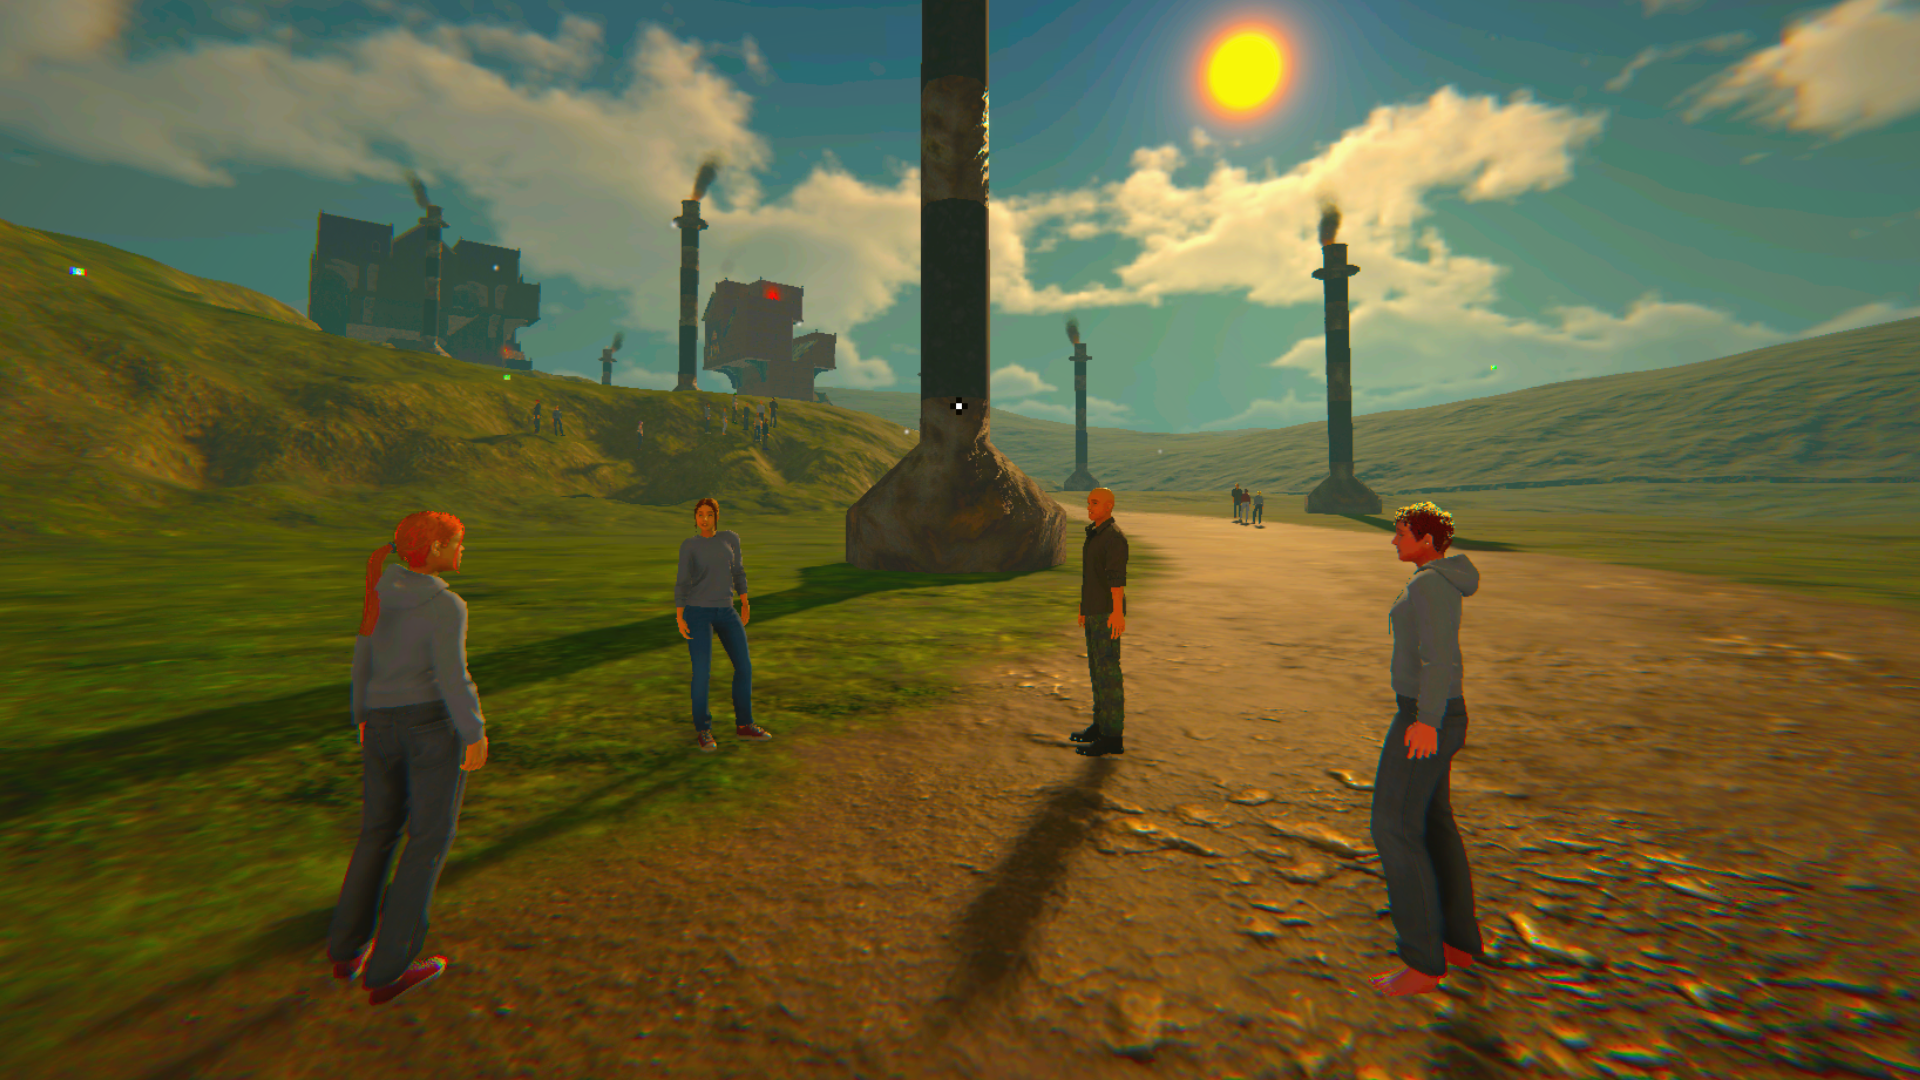 Four characters in a group conversation, standing in front of mountainous terrain with tall columns